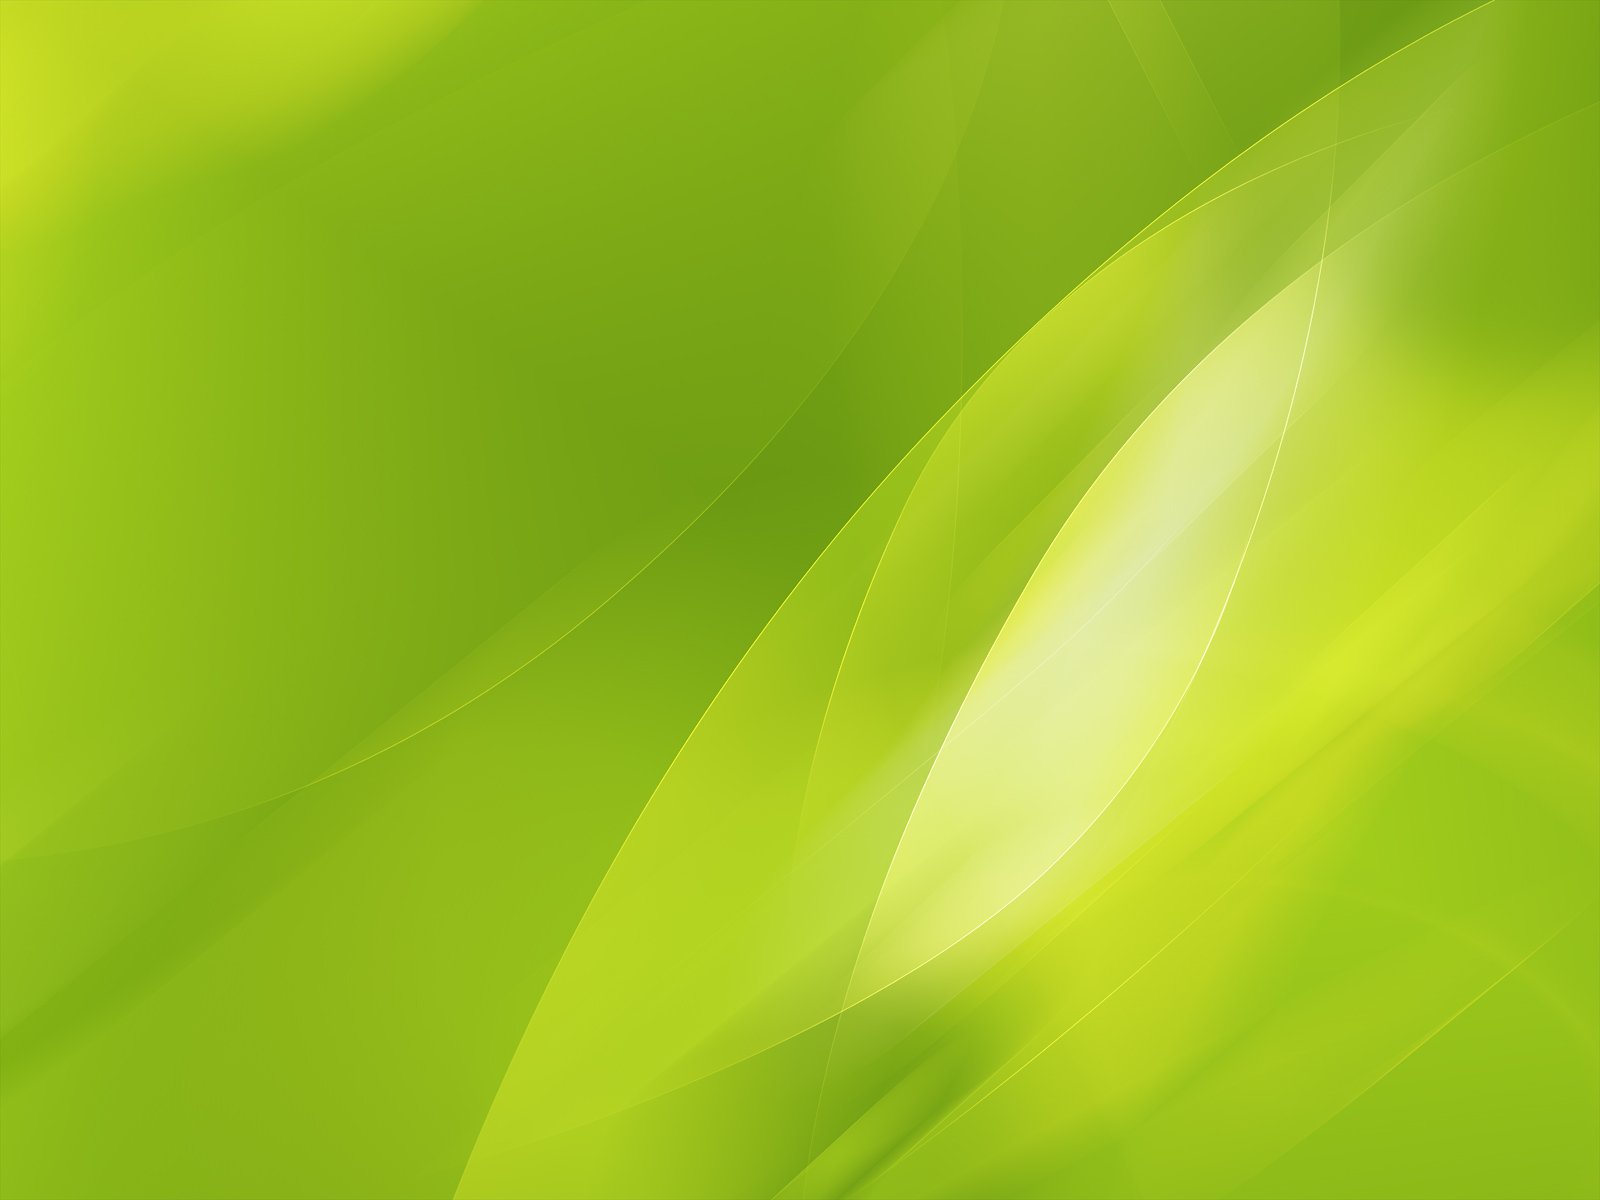  Lime Green Wallpaper Hd Android Desktop Abstract Iphone 5 Design